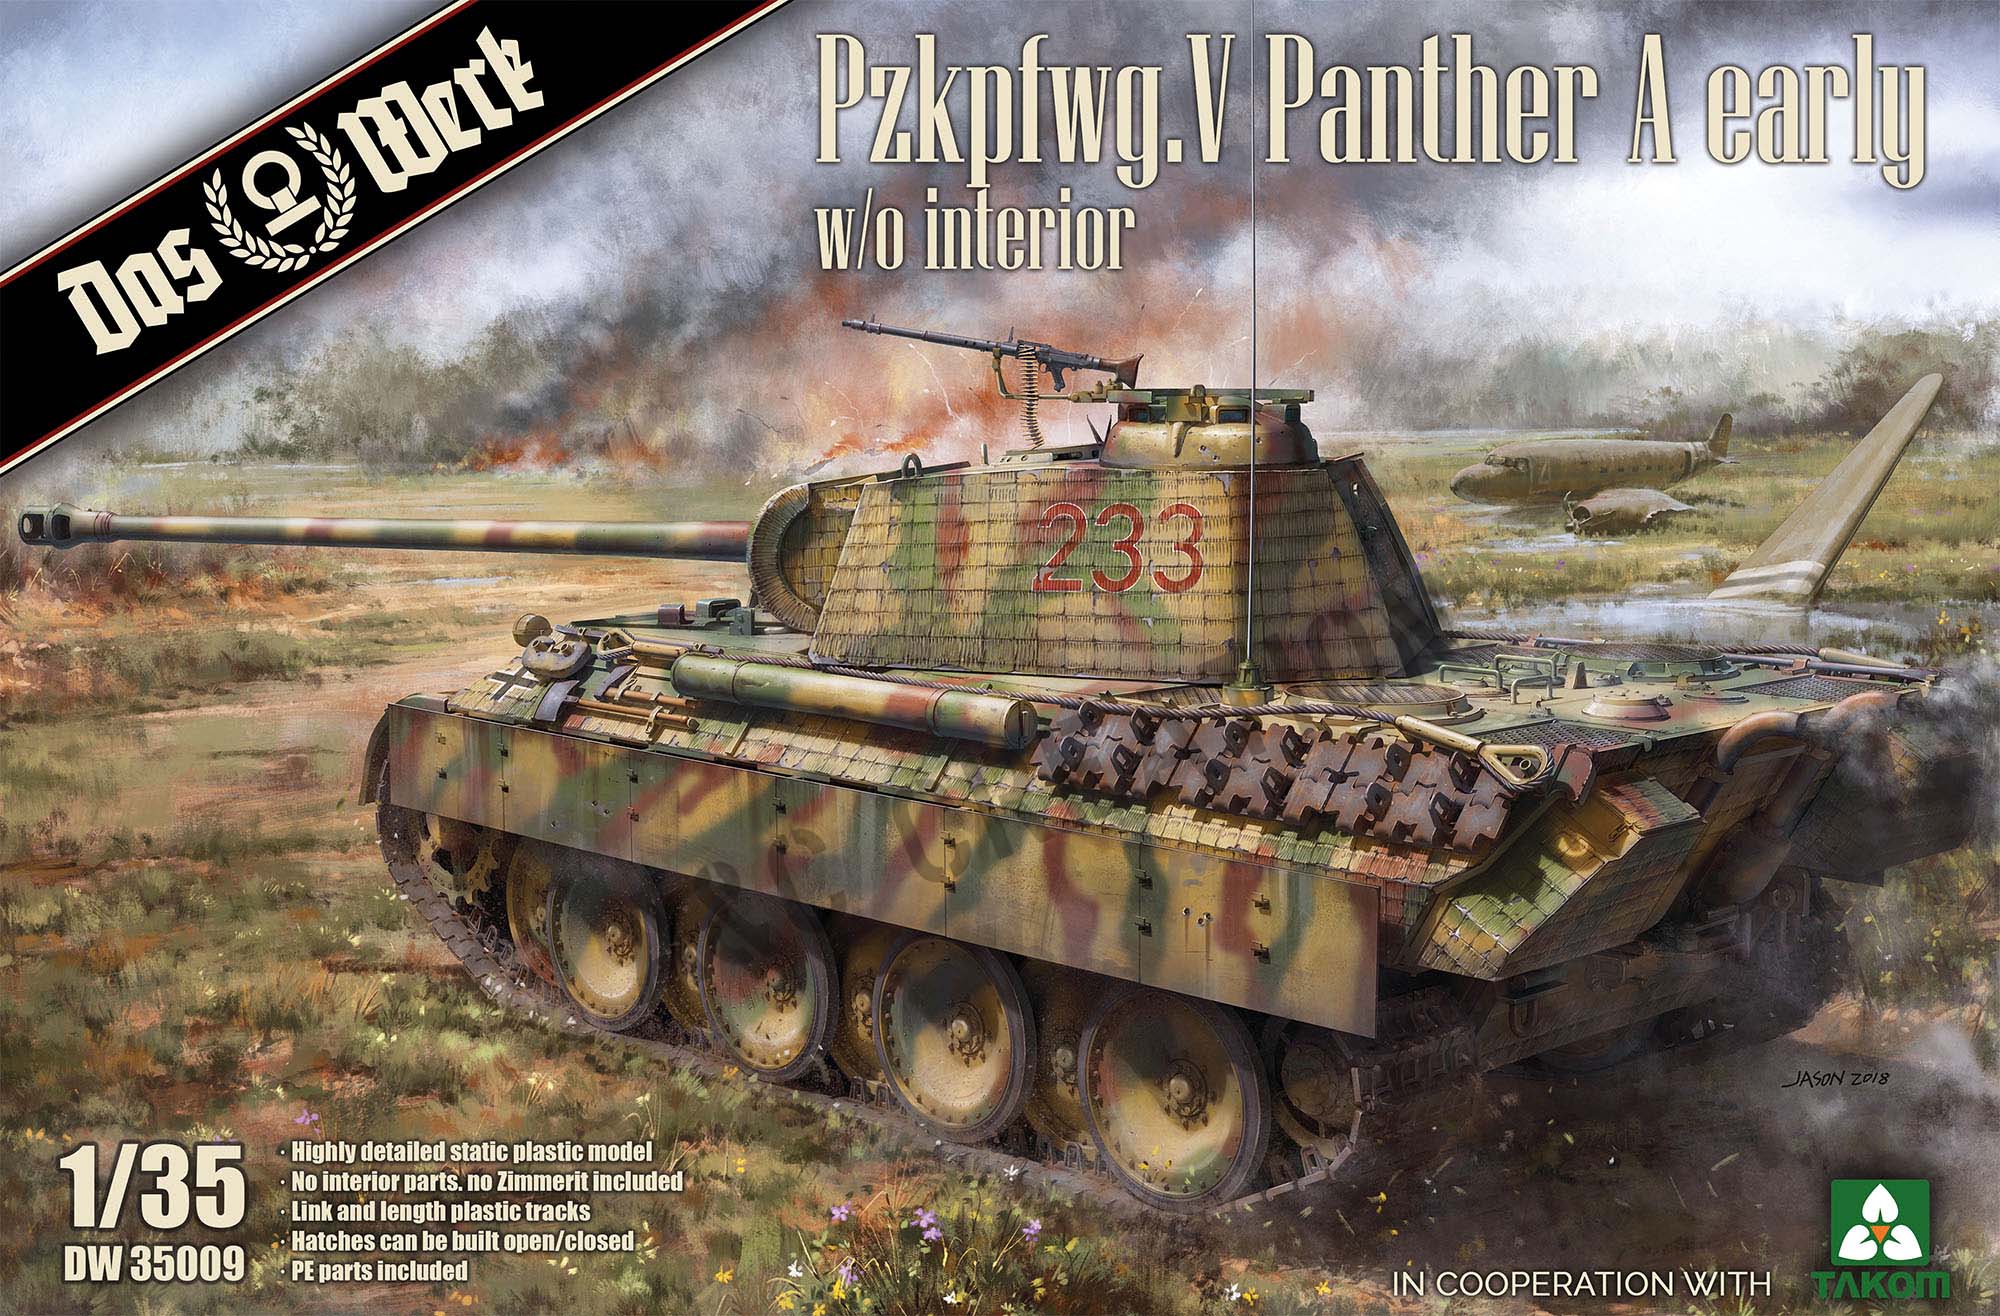 DW35009 Pzkpfwg.V Panther A early (w/o interior)